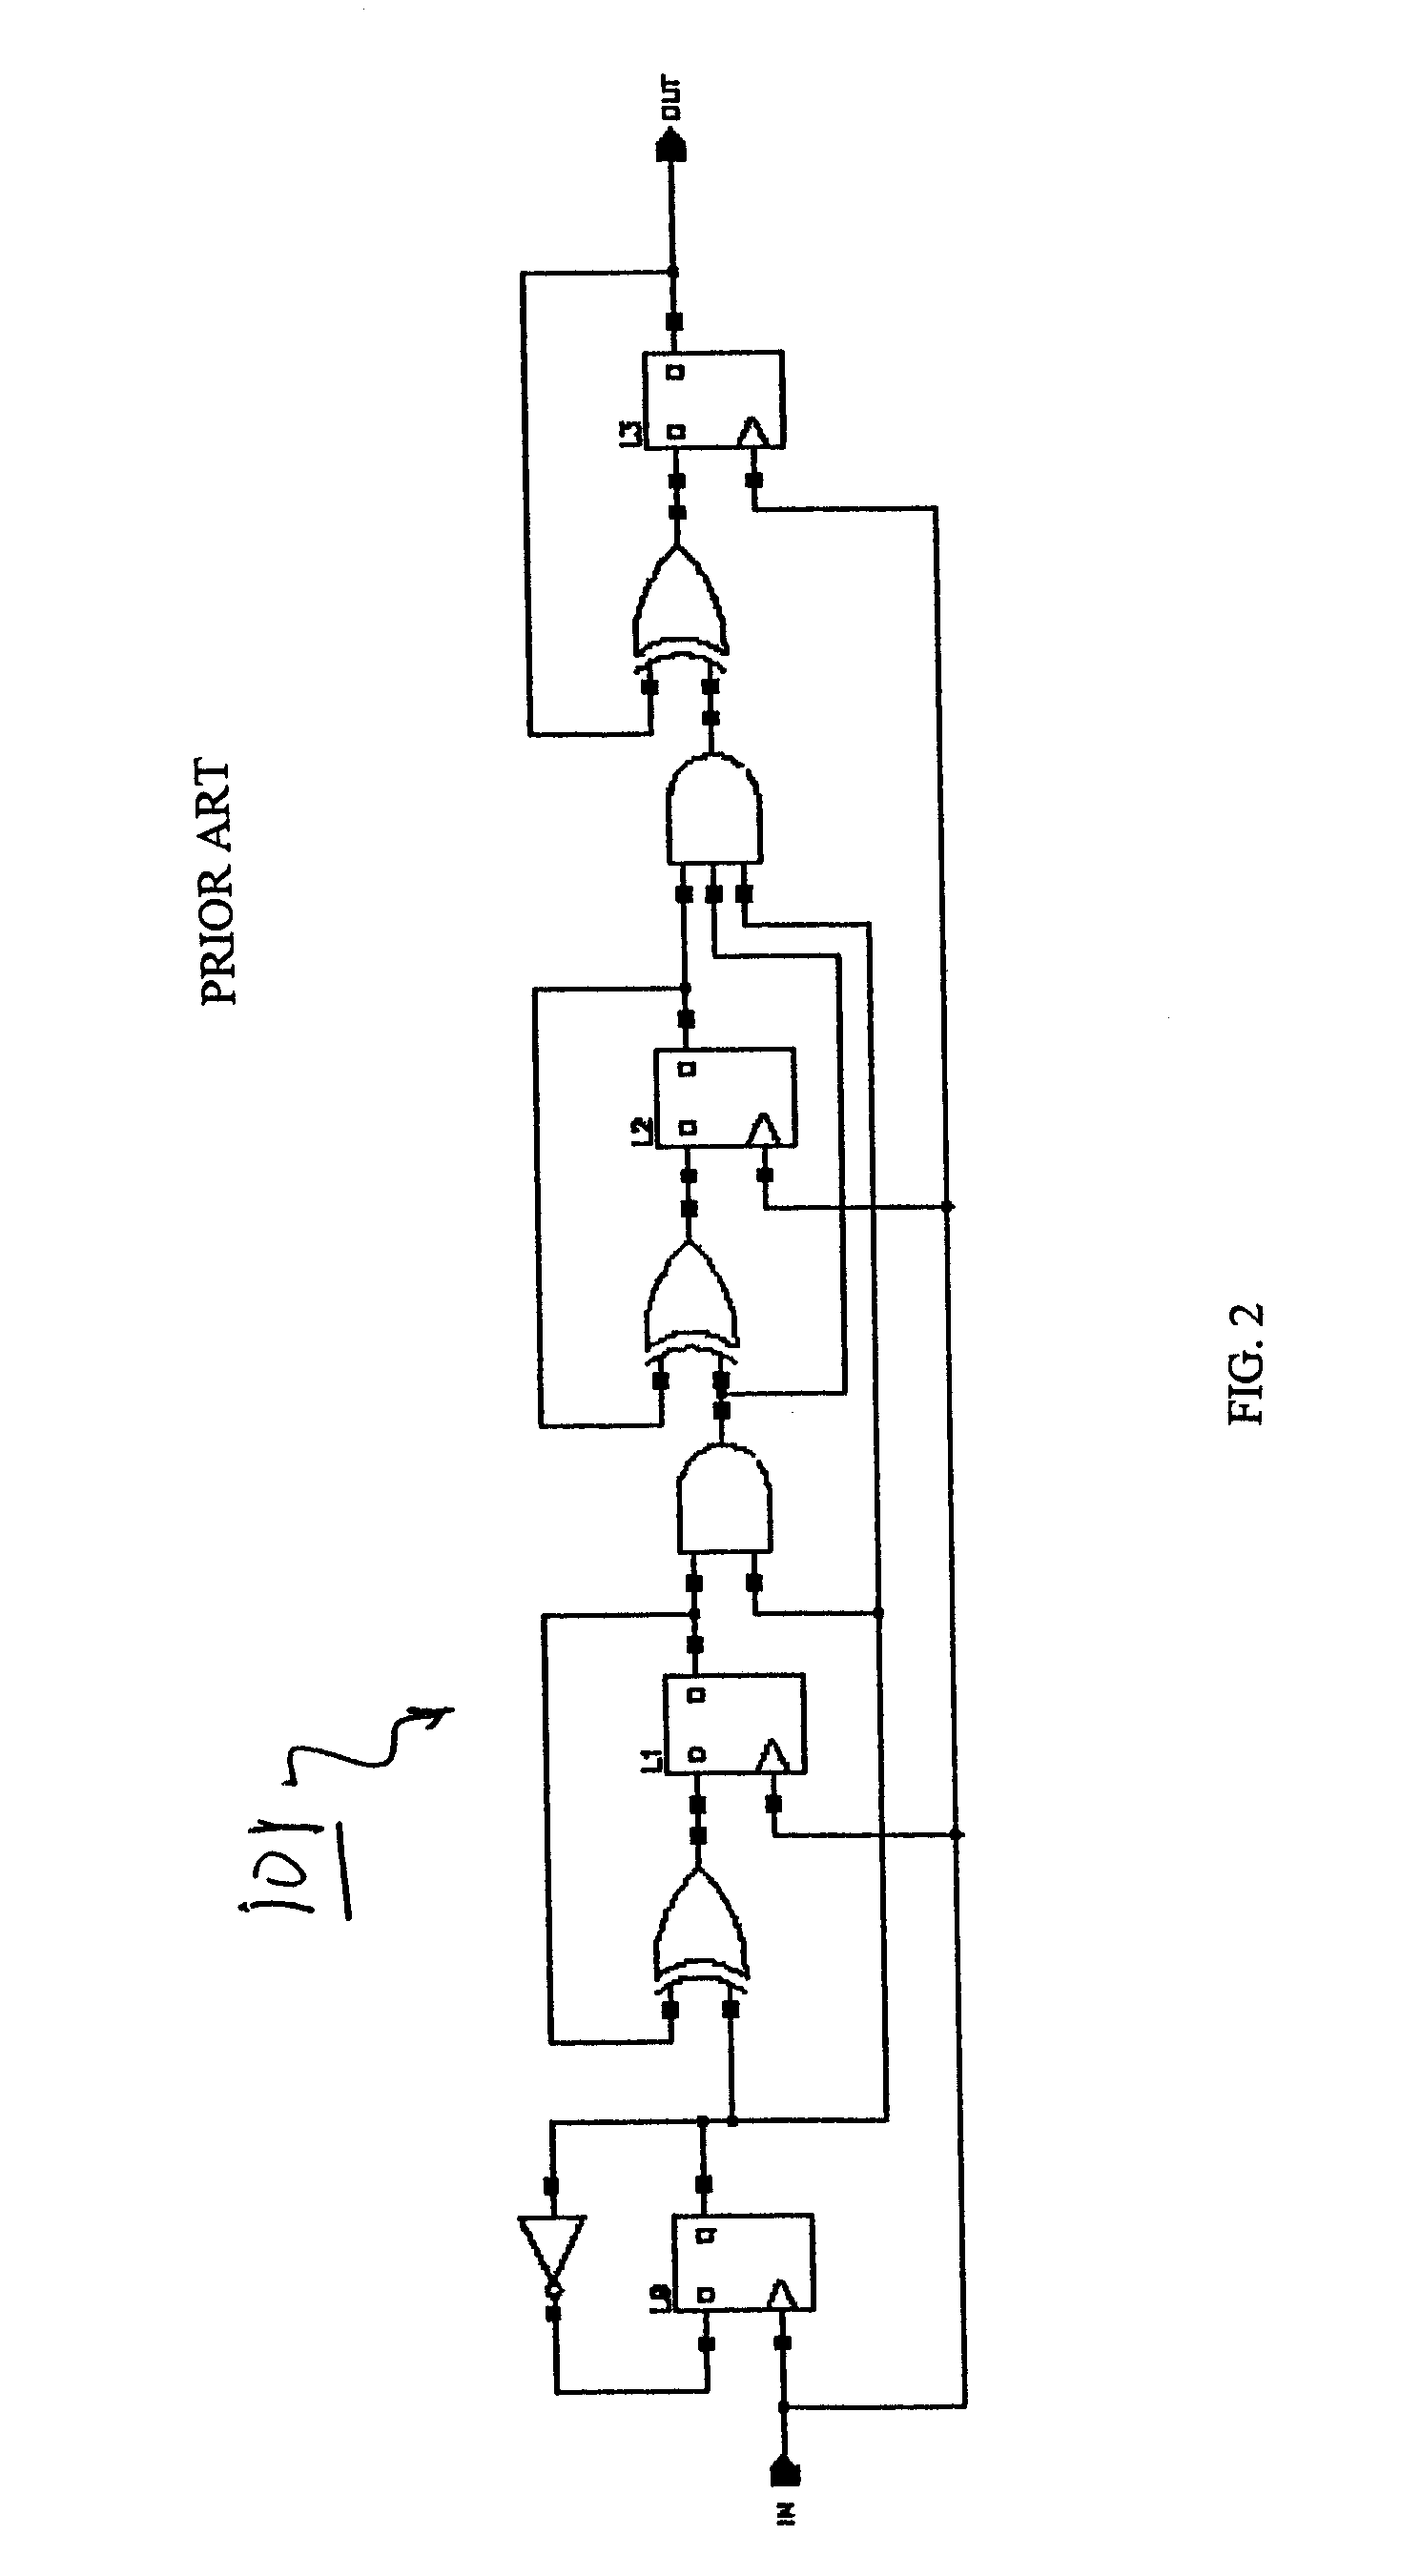 Programmable frequency divider with symmetrical output